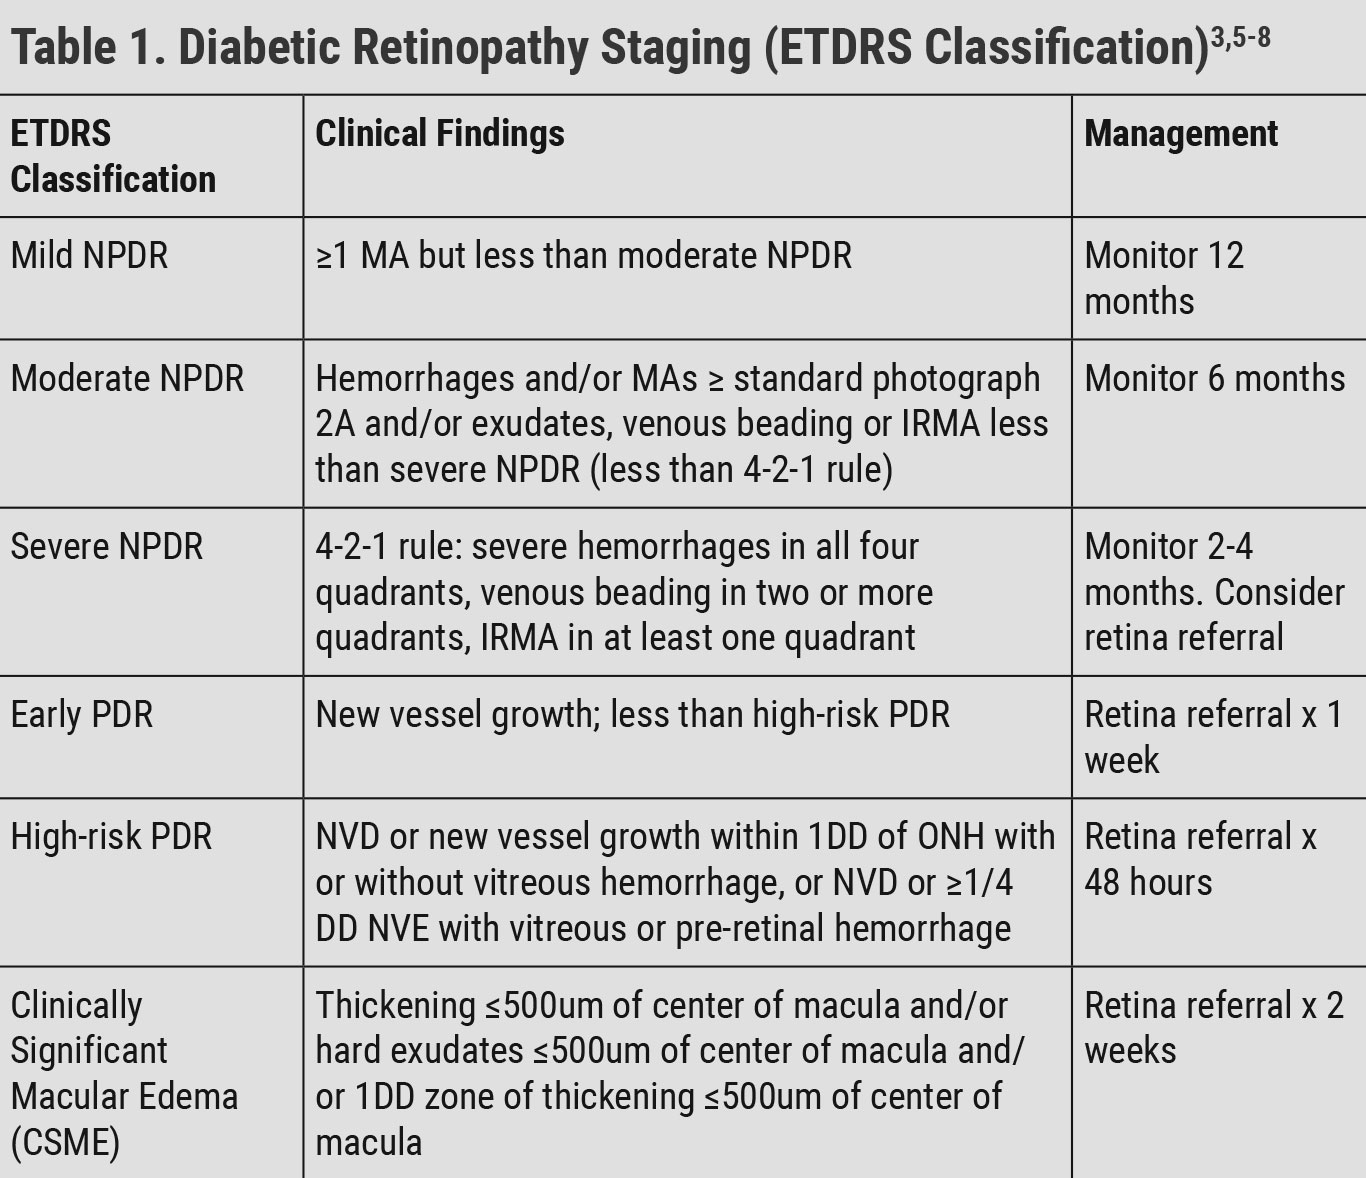 NPDR: non-proliferative diabetic retinopathy, PDR: proliferative diabetic retinopathy, MA: microaneurysm, IRMA: intraretinal microvascular abnormality, NVD: neovascularization of the disc, DD: disc diameter, NVE: neovascularization elsewhere.